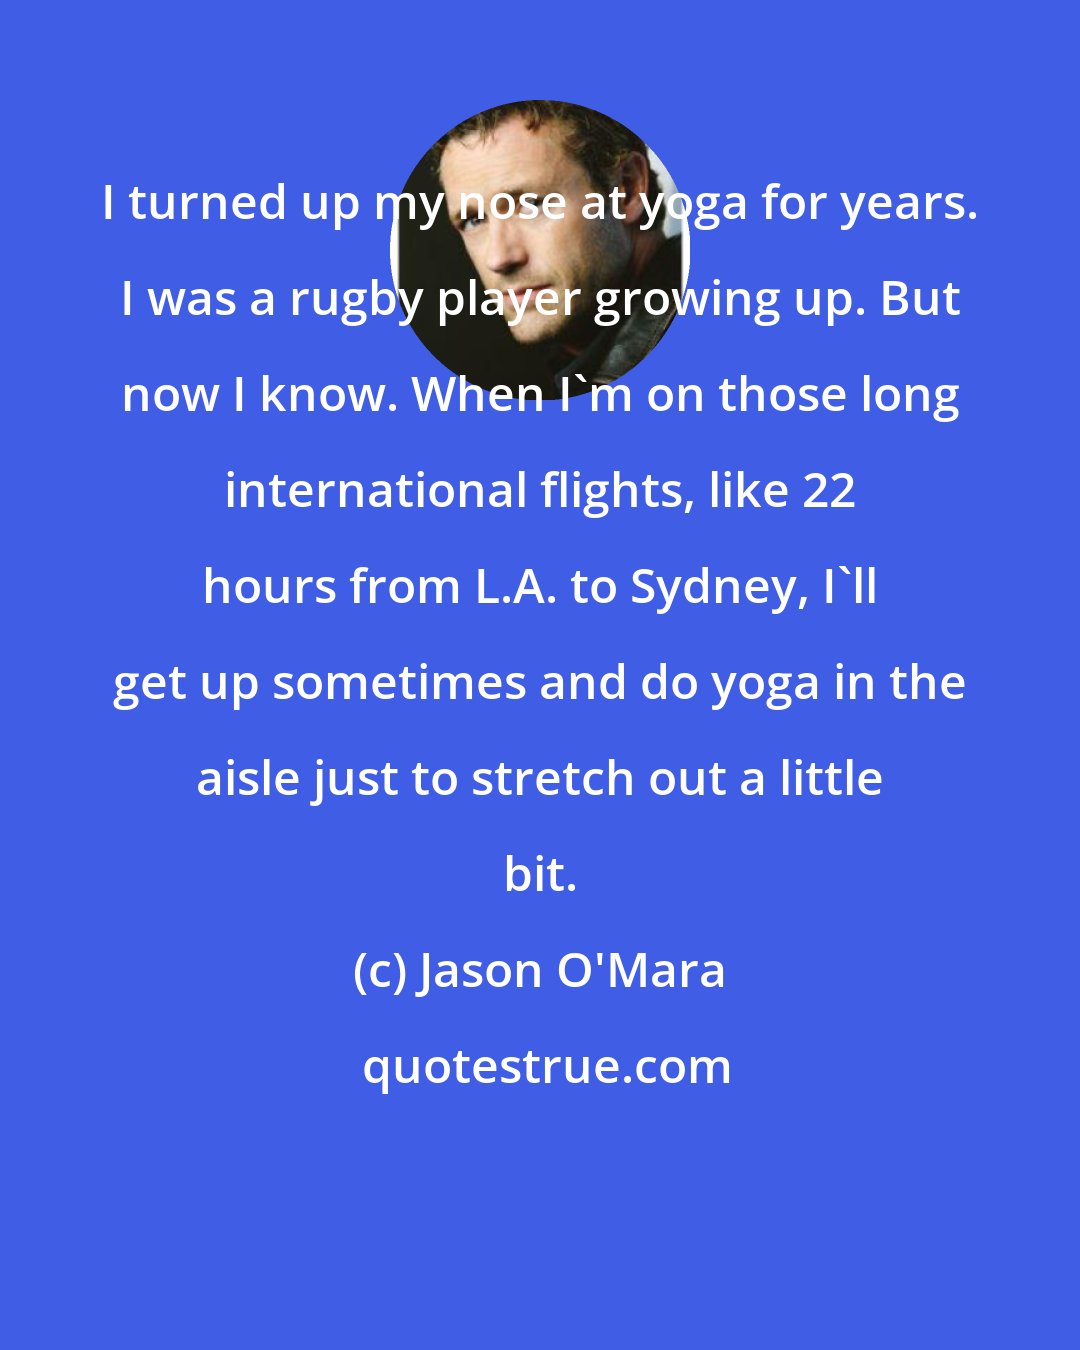 Jason O'Mara: I turned up my nose at yoga for years. I was a rugby player growing up. But now I know. When I'm on those long international flights, like 22 hours from L.A. to Sydney, I'll get up sometimes and do yoga in the aisle just to stretch out a little bit.